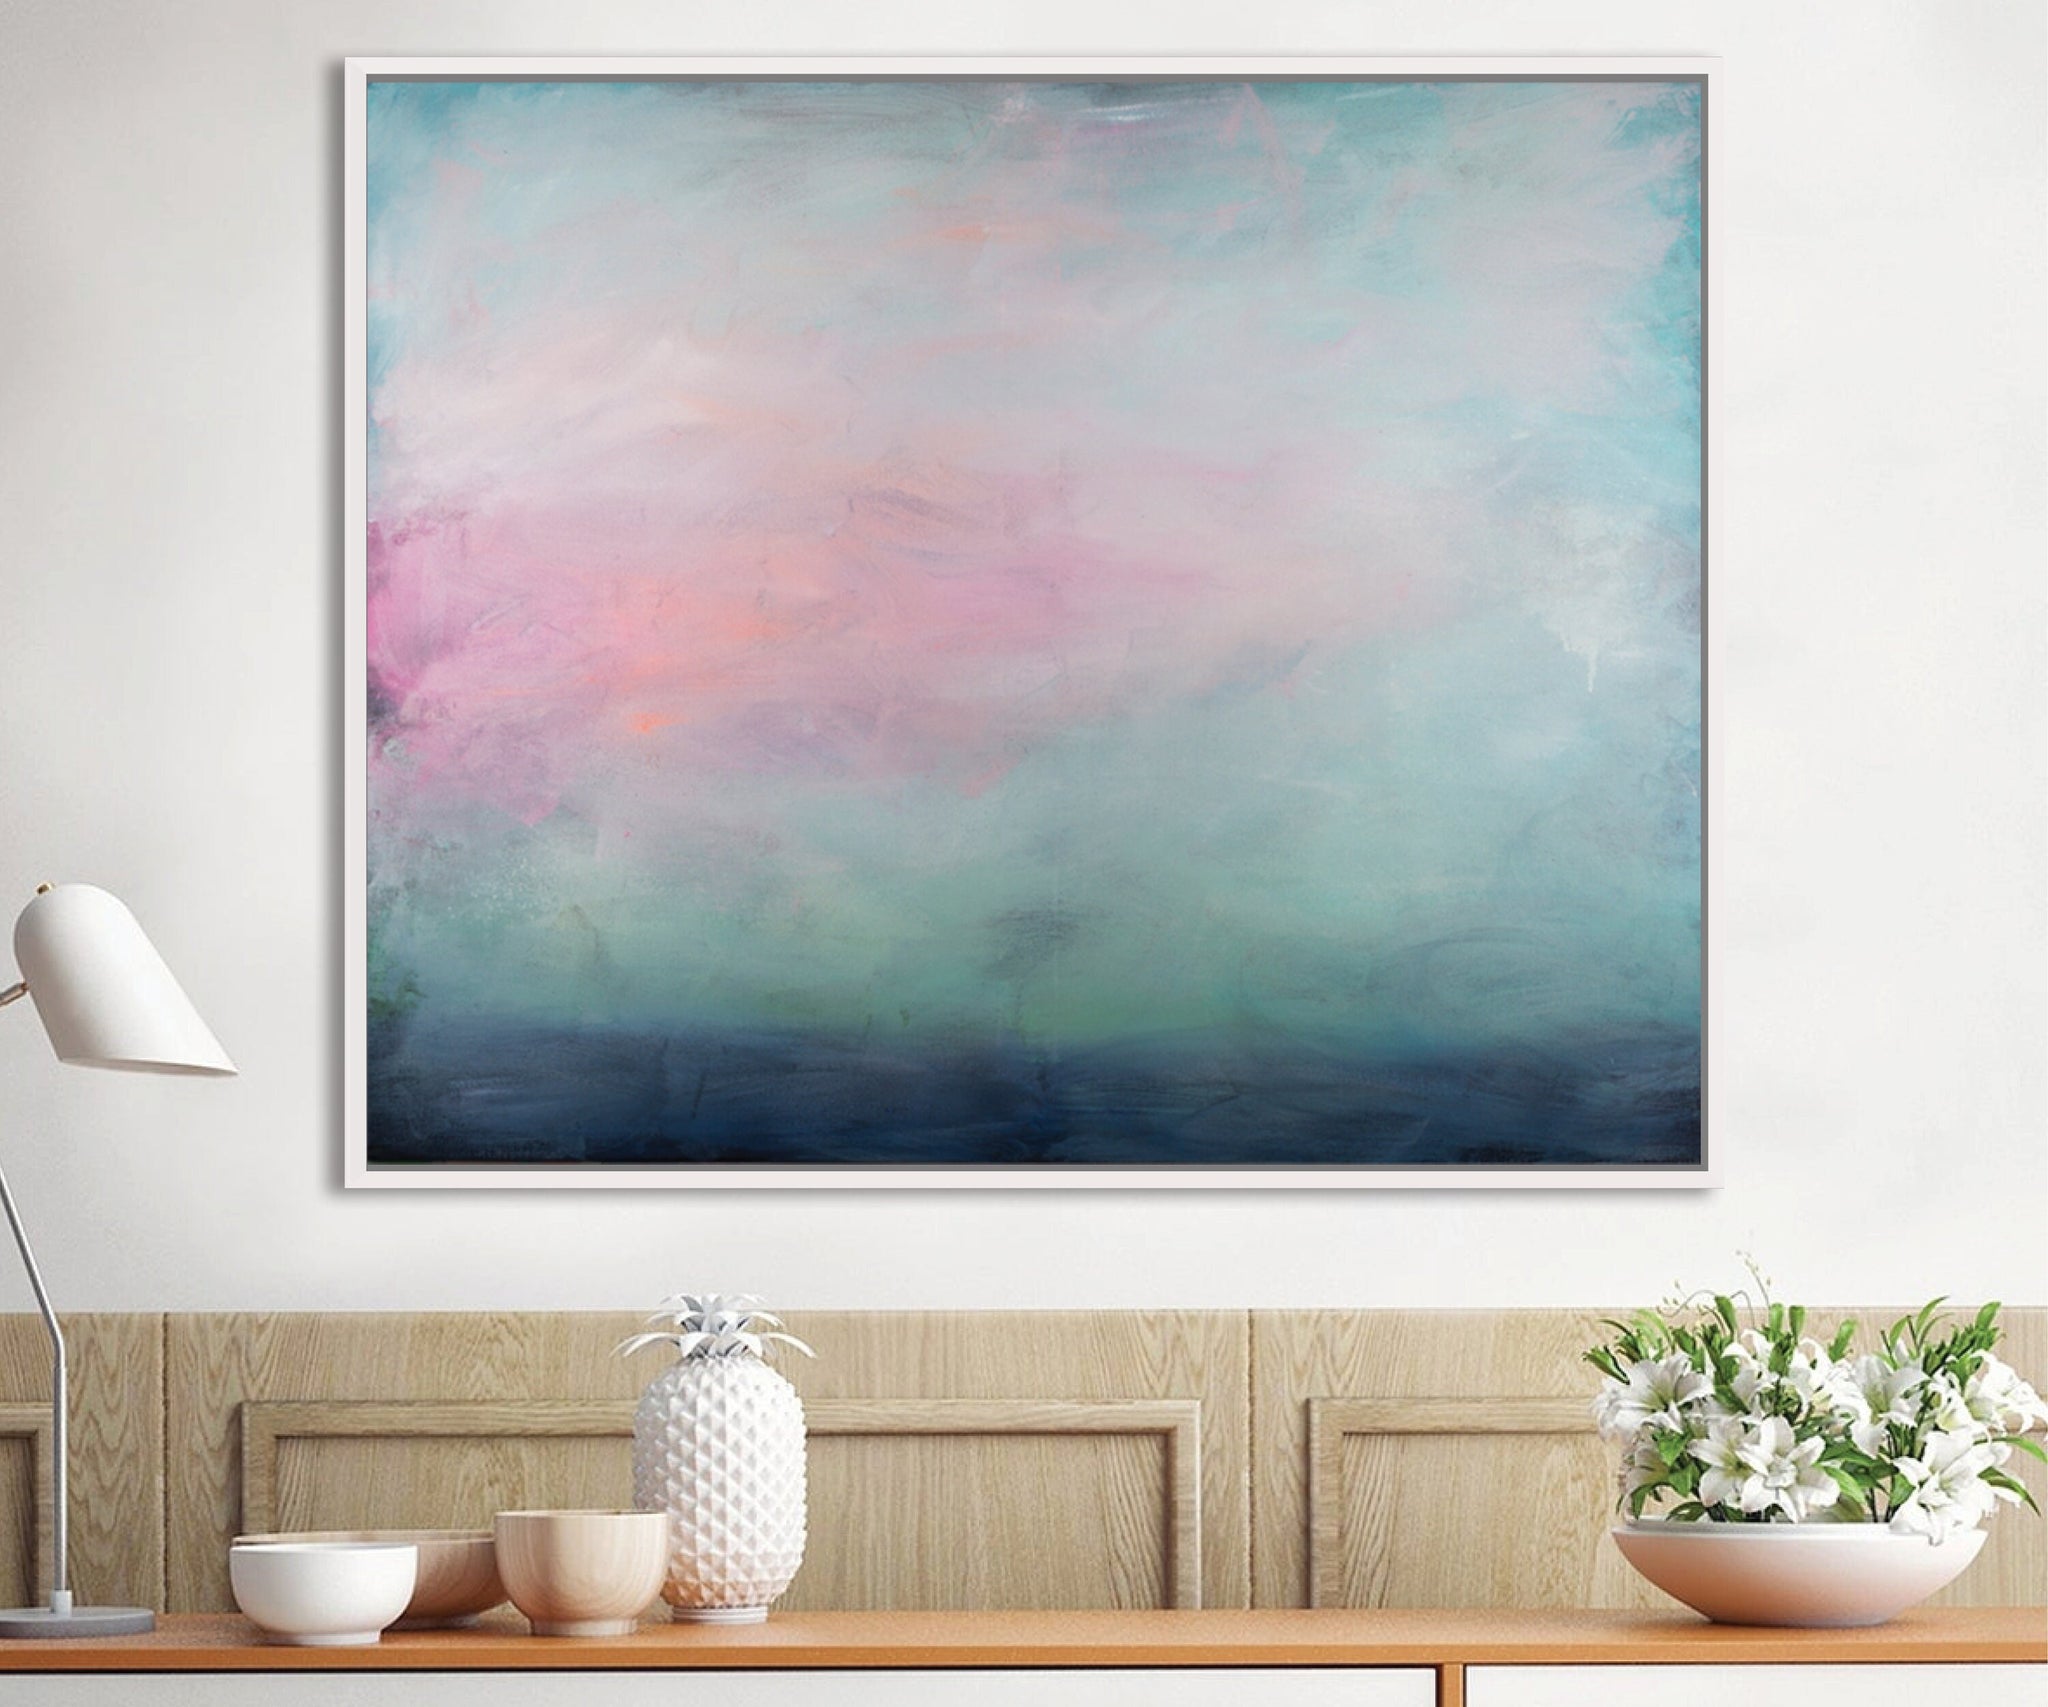 Teal Abstract Painting on Canvas, clouds acrylic painting print, Abstract Ocean Painting print, Ready to hang 